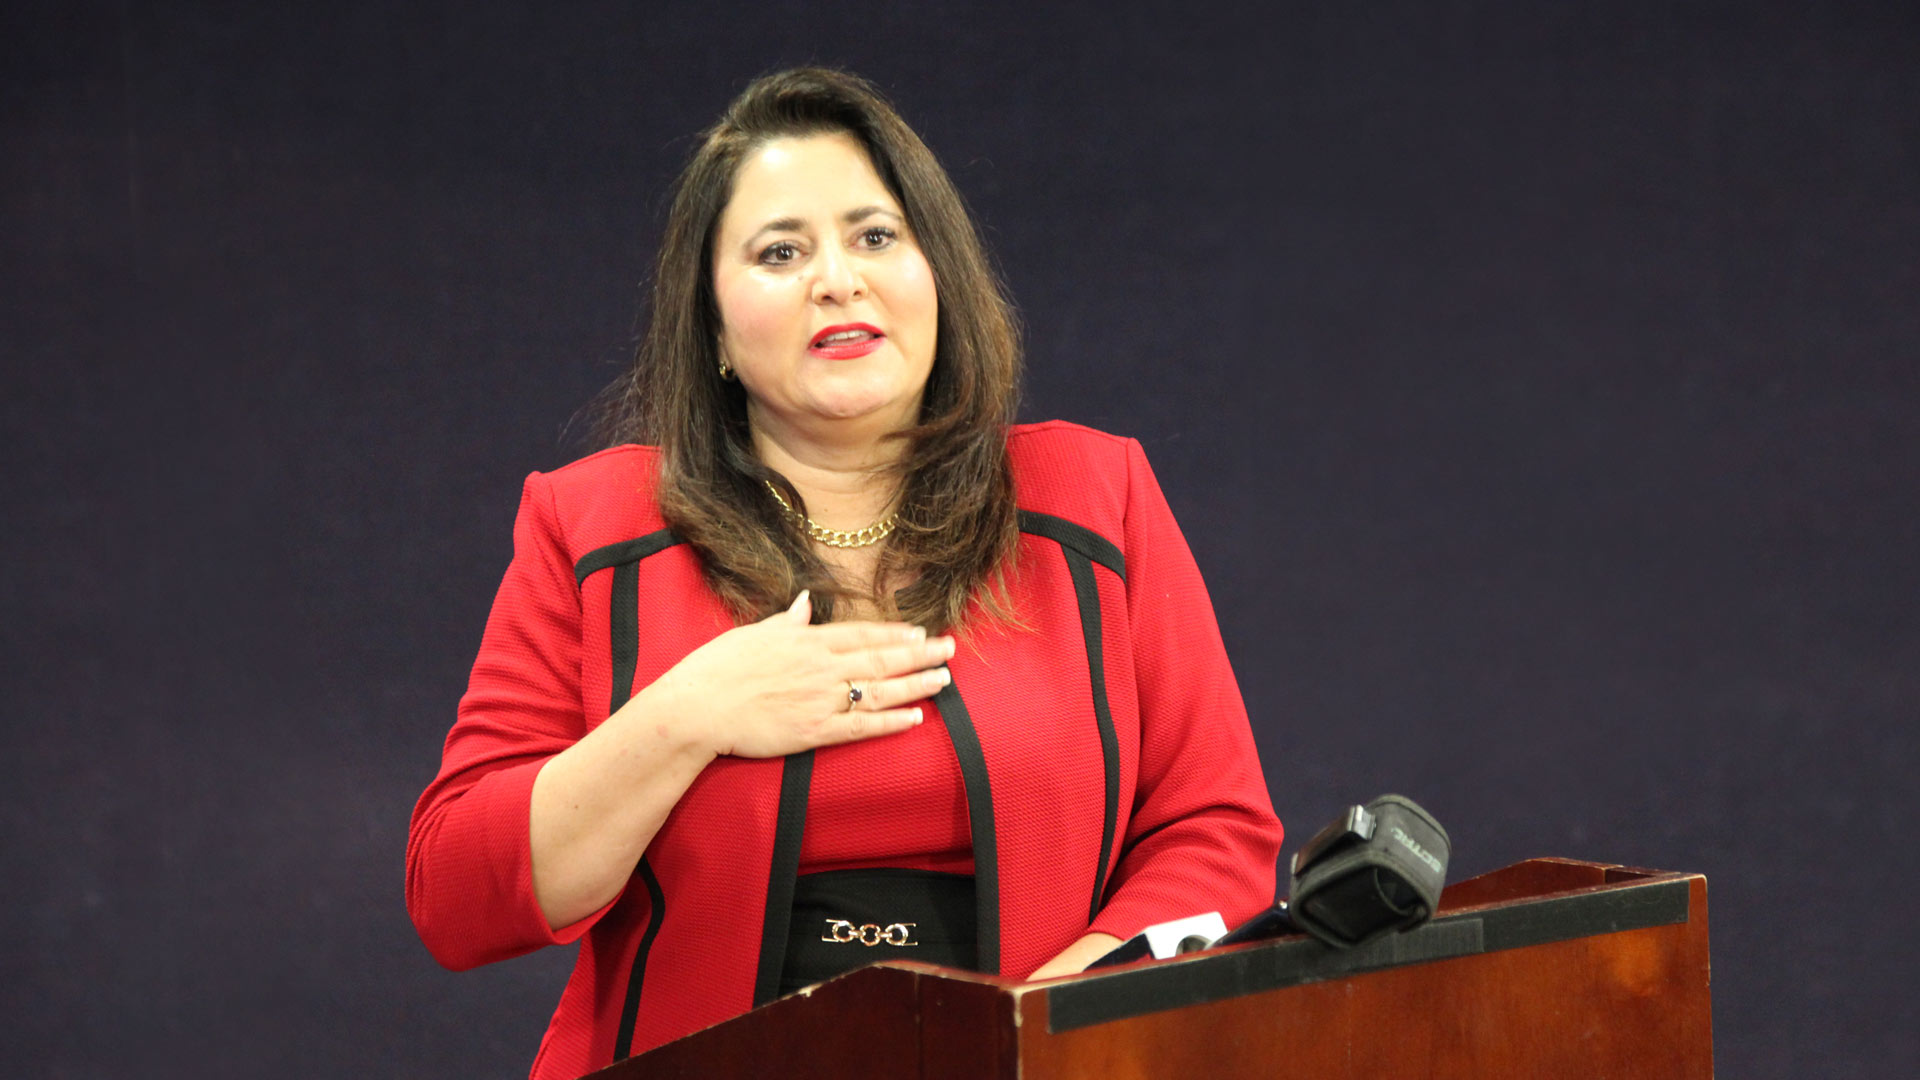 Lea Marquez Peterson answers questions from the press following the 2nd Congressional District debate on Oct. 9, 2018.